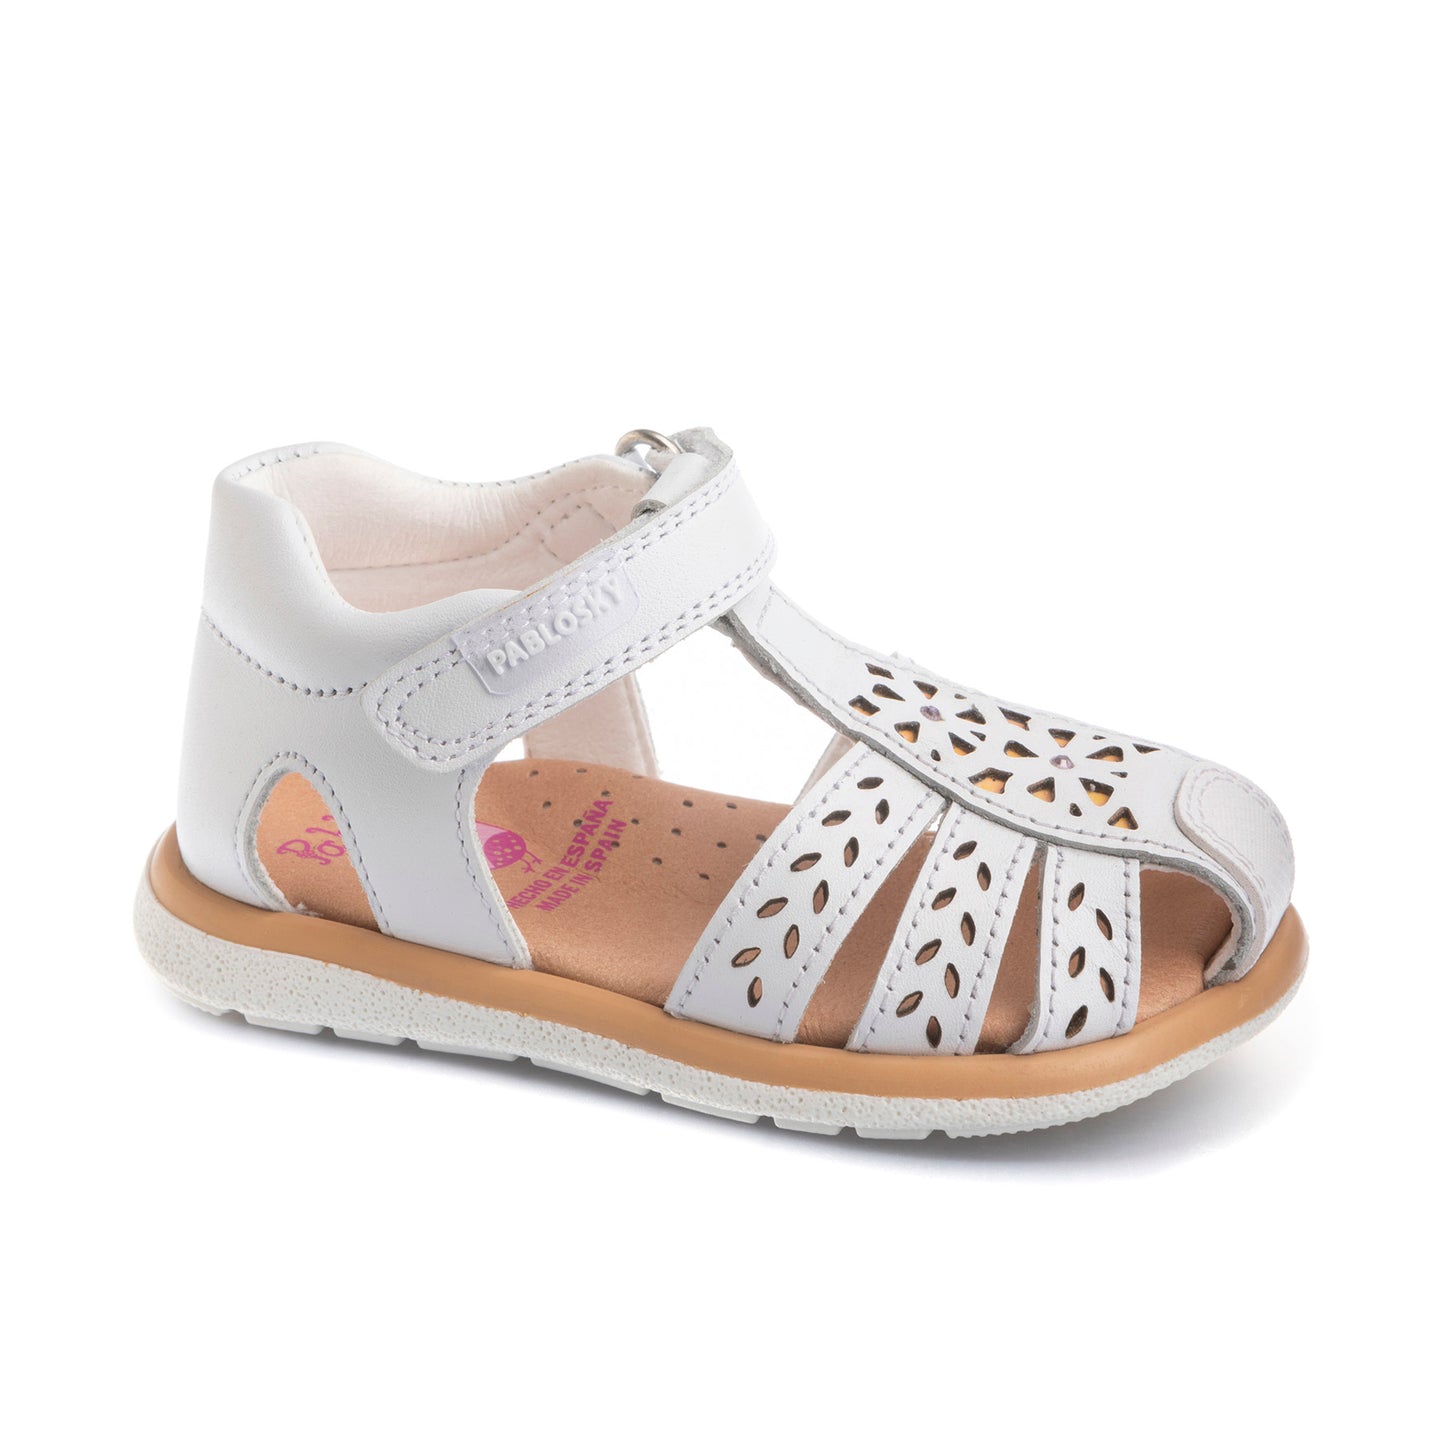 Pablosky Olimpo Sandals / 031300